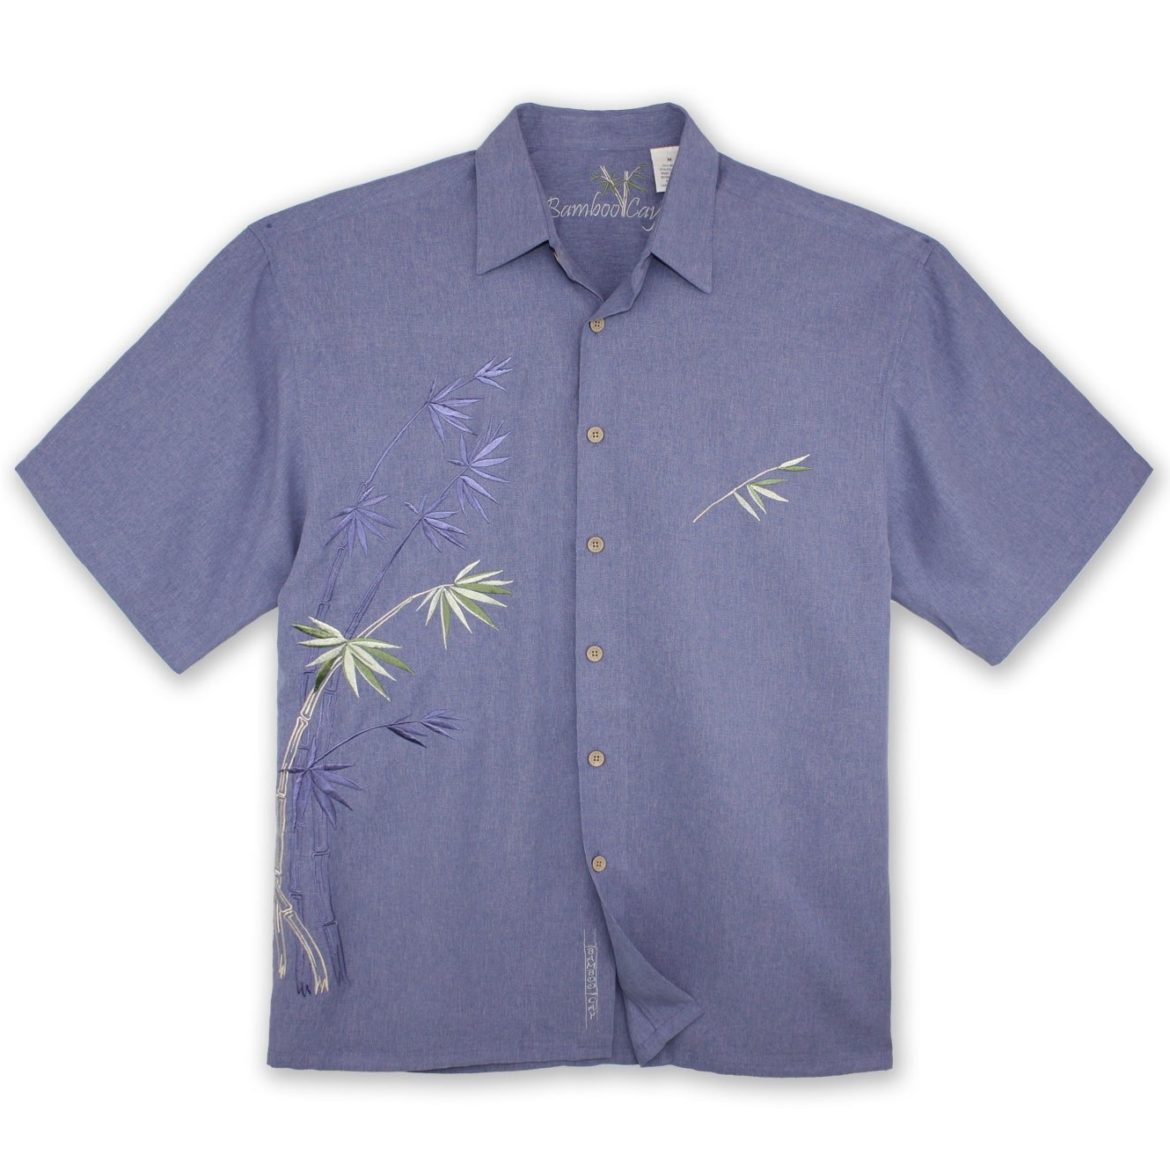 mens-bamboo-cay-resort-shirt-leaning-bamboo-blue-front-view